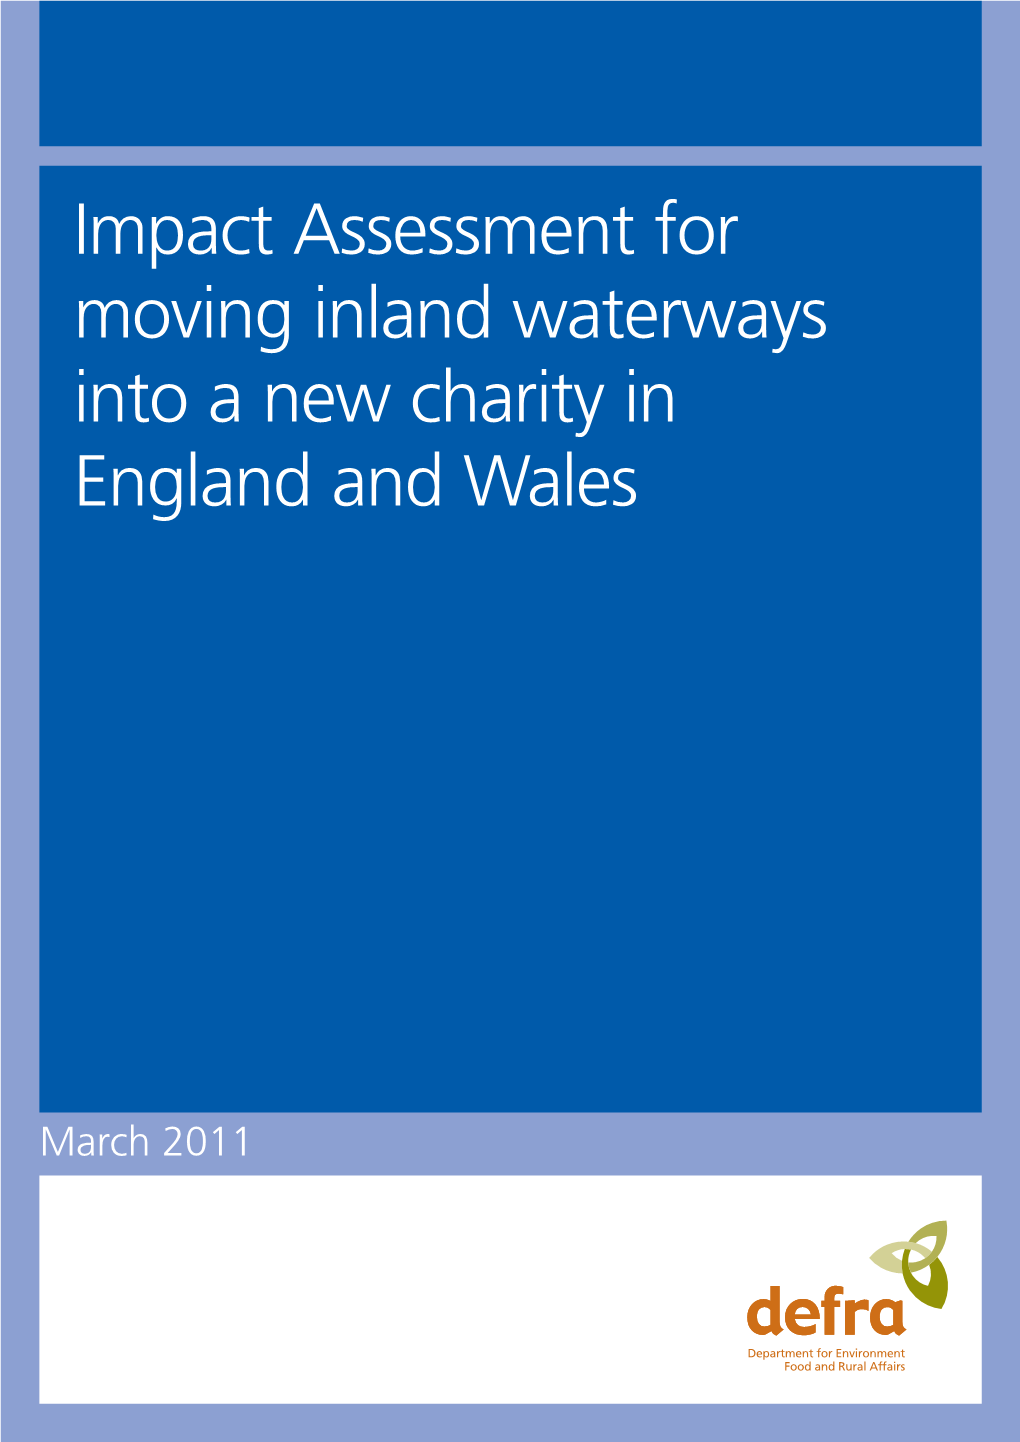 Impact Assessment for Moving Inland Waterways Into a New Charity in England and Wales